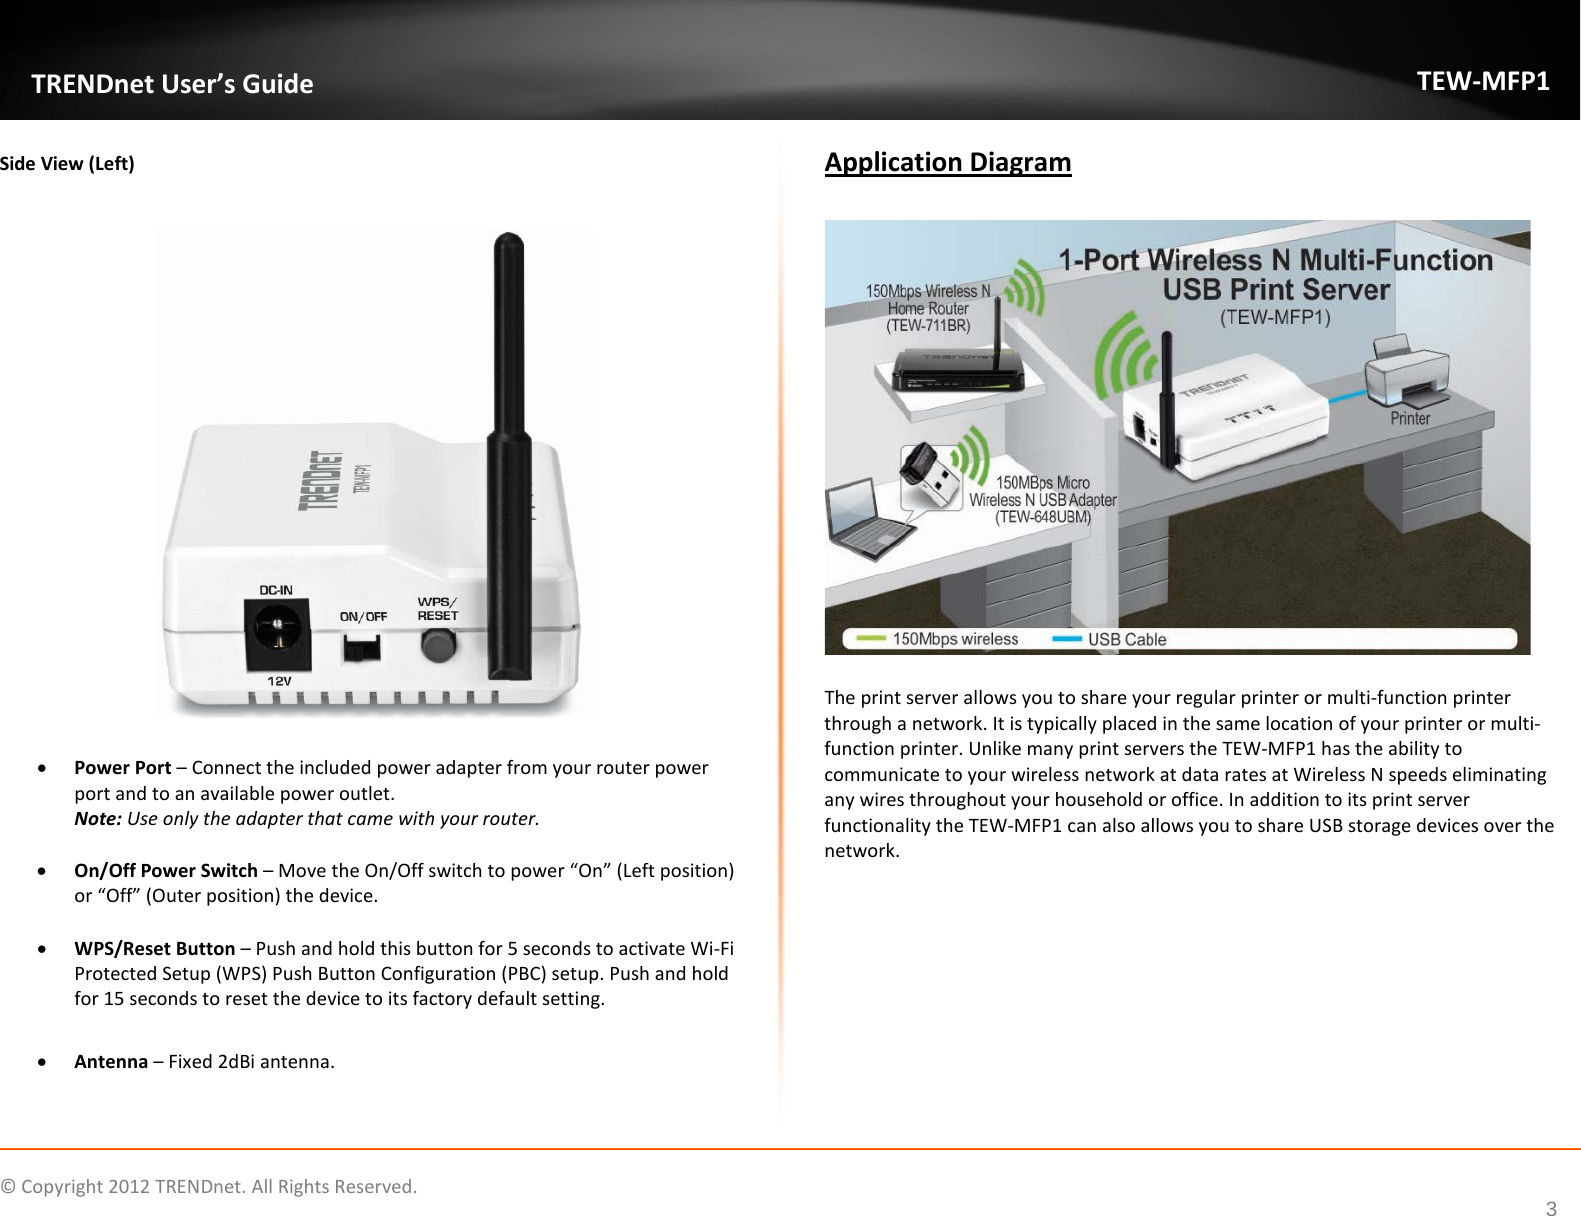              © Copyright 2012 TRENDnet. All Rights Reserved.       TRENDnet User’s Guide TEW-MFP1 3 Side View (Left)    • Power Port – Connect the included power adapter from your router power port and to an available power outlet. Note: Use only the adapter that came with your router.  • On/Off Power Switch – Move the On/Off switch to power “On” (Left position) or “Off” (Outer position) the device.  • WPS/Reset Button – Push and hold this button for 5 seconds to activate Wi-Fi Protected Setup (WPS) Push Button Configuration (PBC) setup. Push and hold for 15 seconds to reset the device to its factory default setting.    • Antenna – Fixed 2dBi antenna.  Application Diagram    The print server allows you to share your regular printer or multi-function printer through a network. It is typically placed in the same location of your printer or multi-function printer. Unlike many print servers the TEW-MFP1 has the ability to communicate to your wireless network at data rates at Wireless N speeds eliminating any wires throughout your household or office. In addition to its print server functionality the TEW-MFP1 can also allows you to share USB storage devices over the network.  